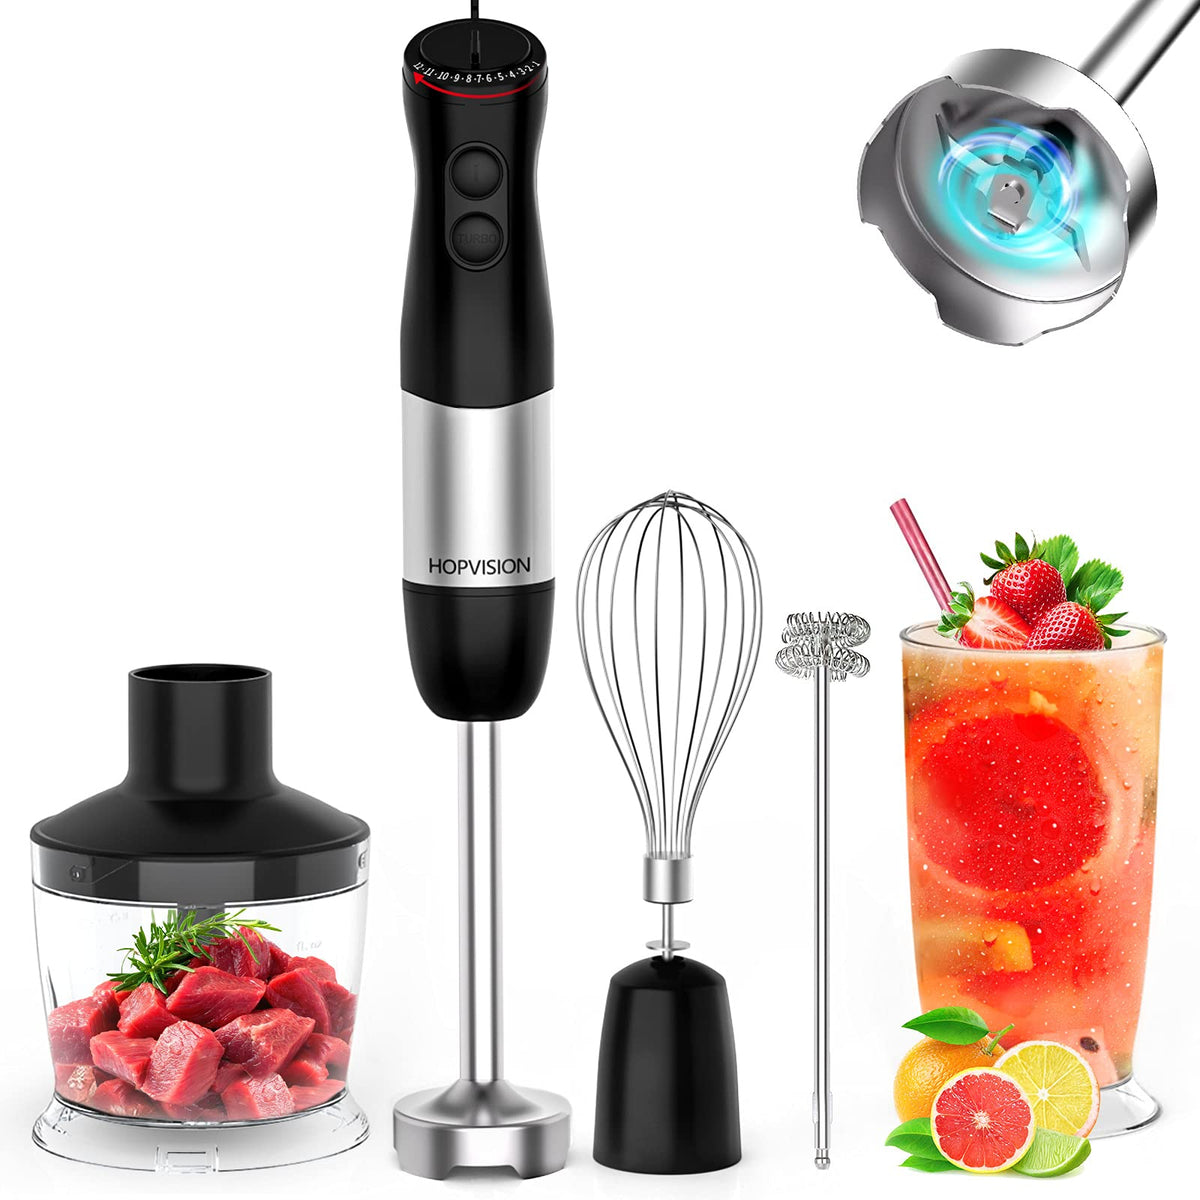 New VAVSEA 1000W 5-in-1 Immersion hand Blender, 12 Speed Stick Blender with  Mixing Beaker (22oz), Food Processor, 304 Stainless Steel With Egg Whisk,  Milk Frother for Puree Infant Food, BPA Free, Red